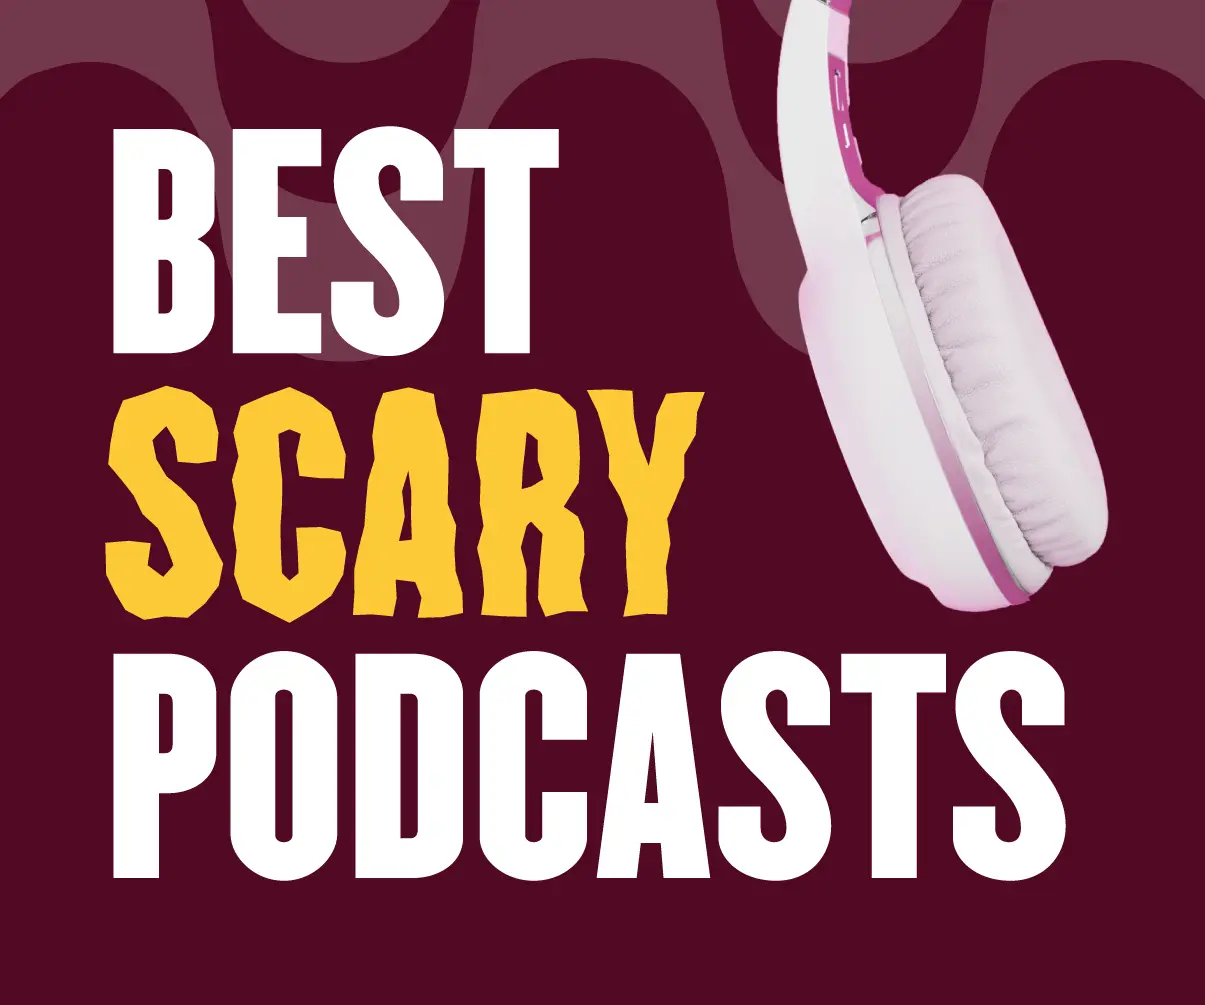 Spooky podcasts to get you into the Halloween spirit